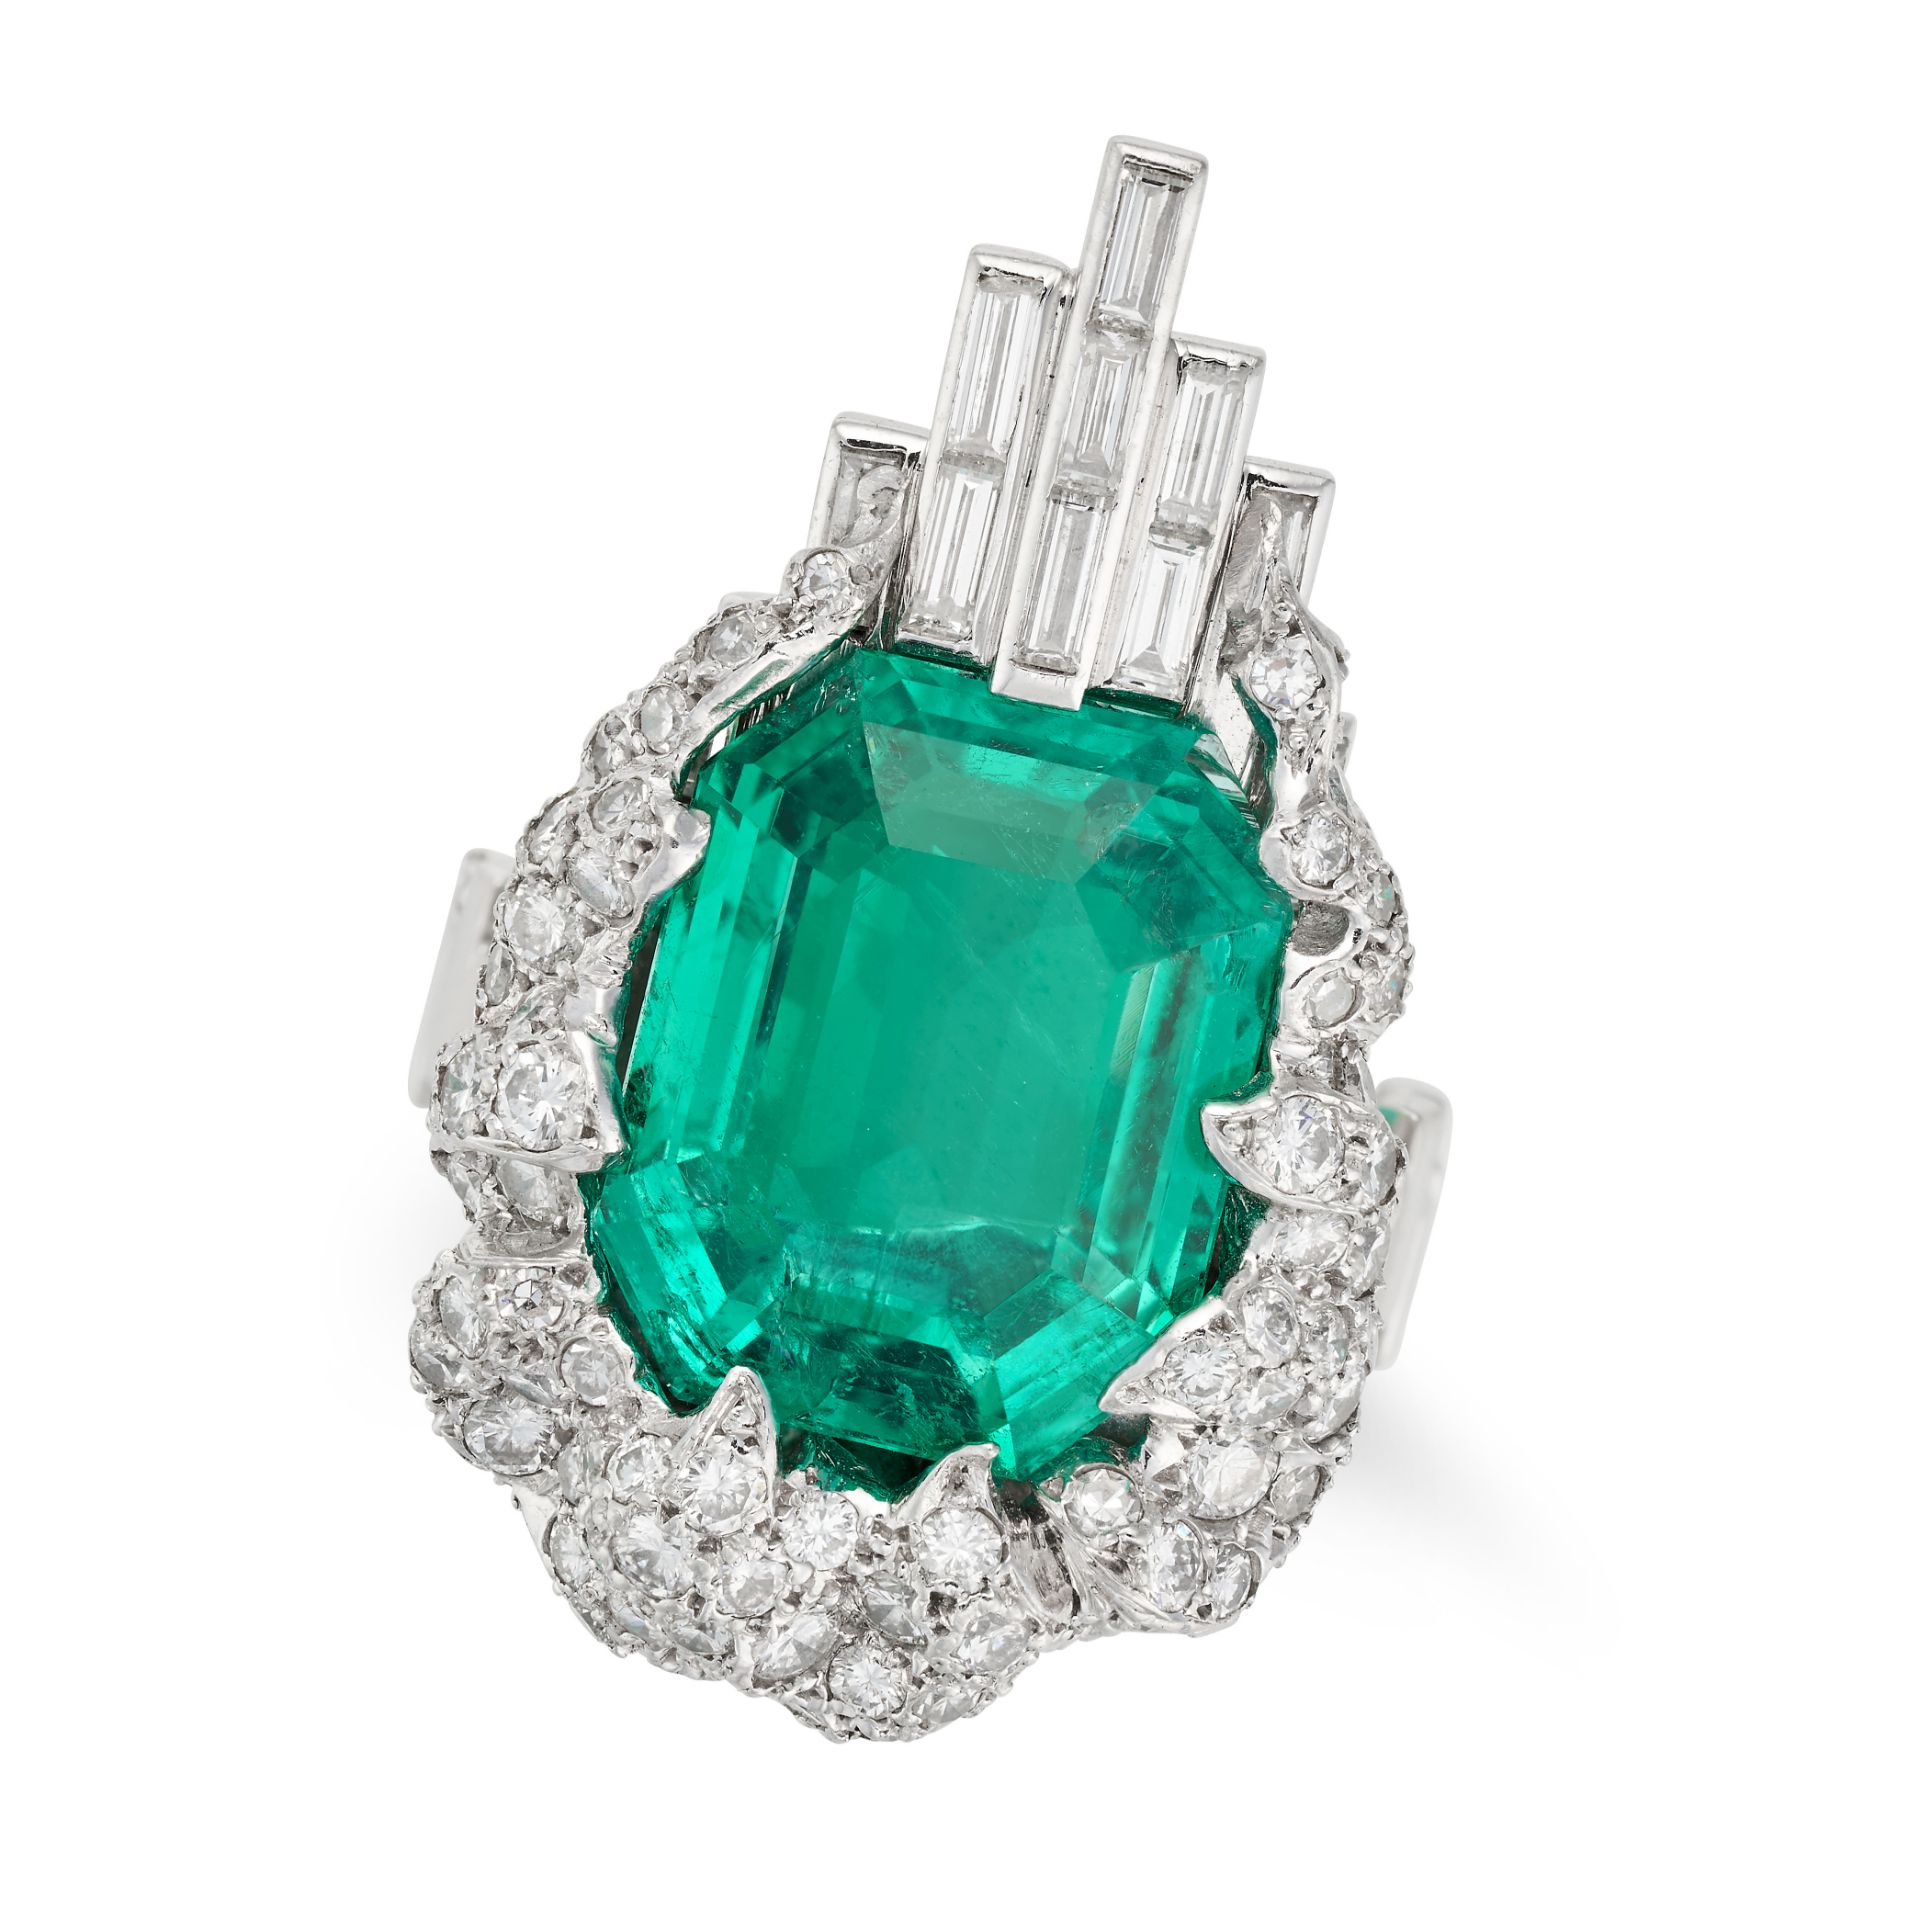 STERLE, AN IMPORTANT 9.89 CARAT UNTREATED COLOMBIAN EMERALD AND DIAMOND RING in platinum, set wit... - Image 2 of 3